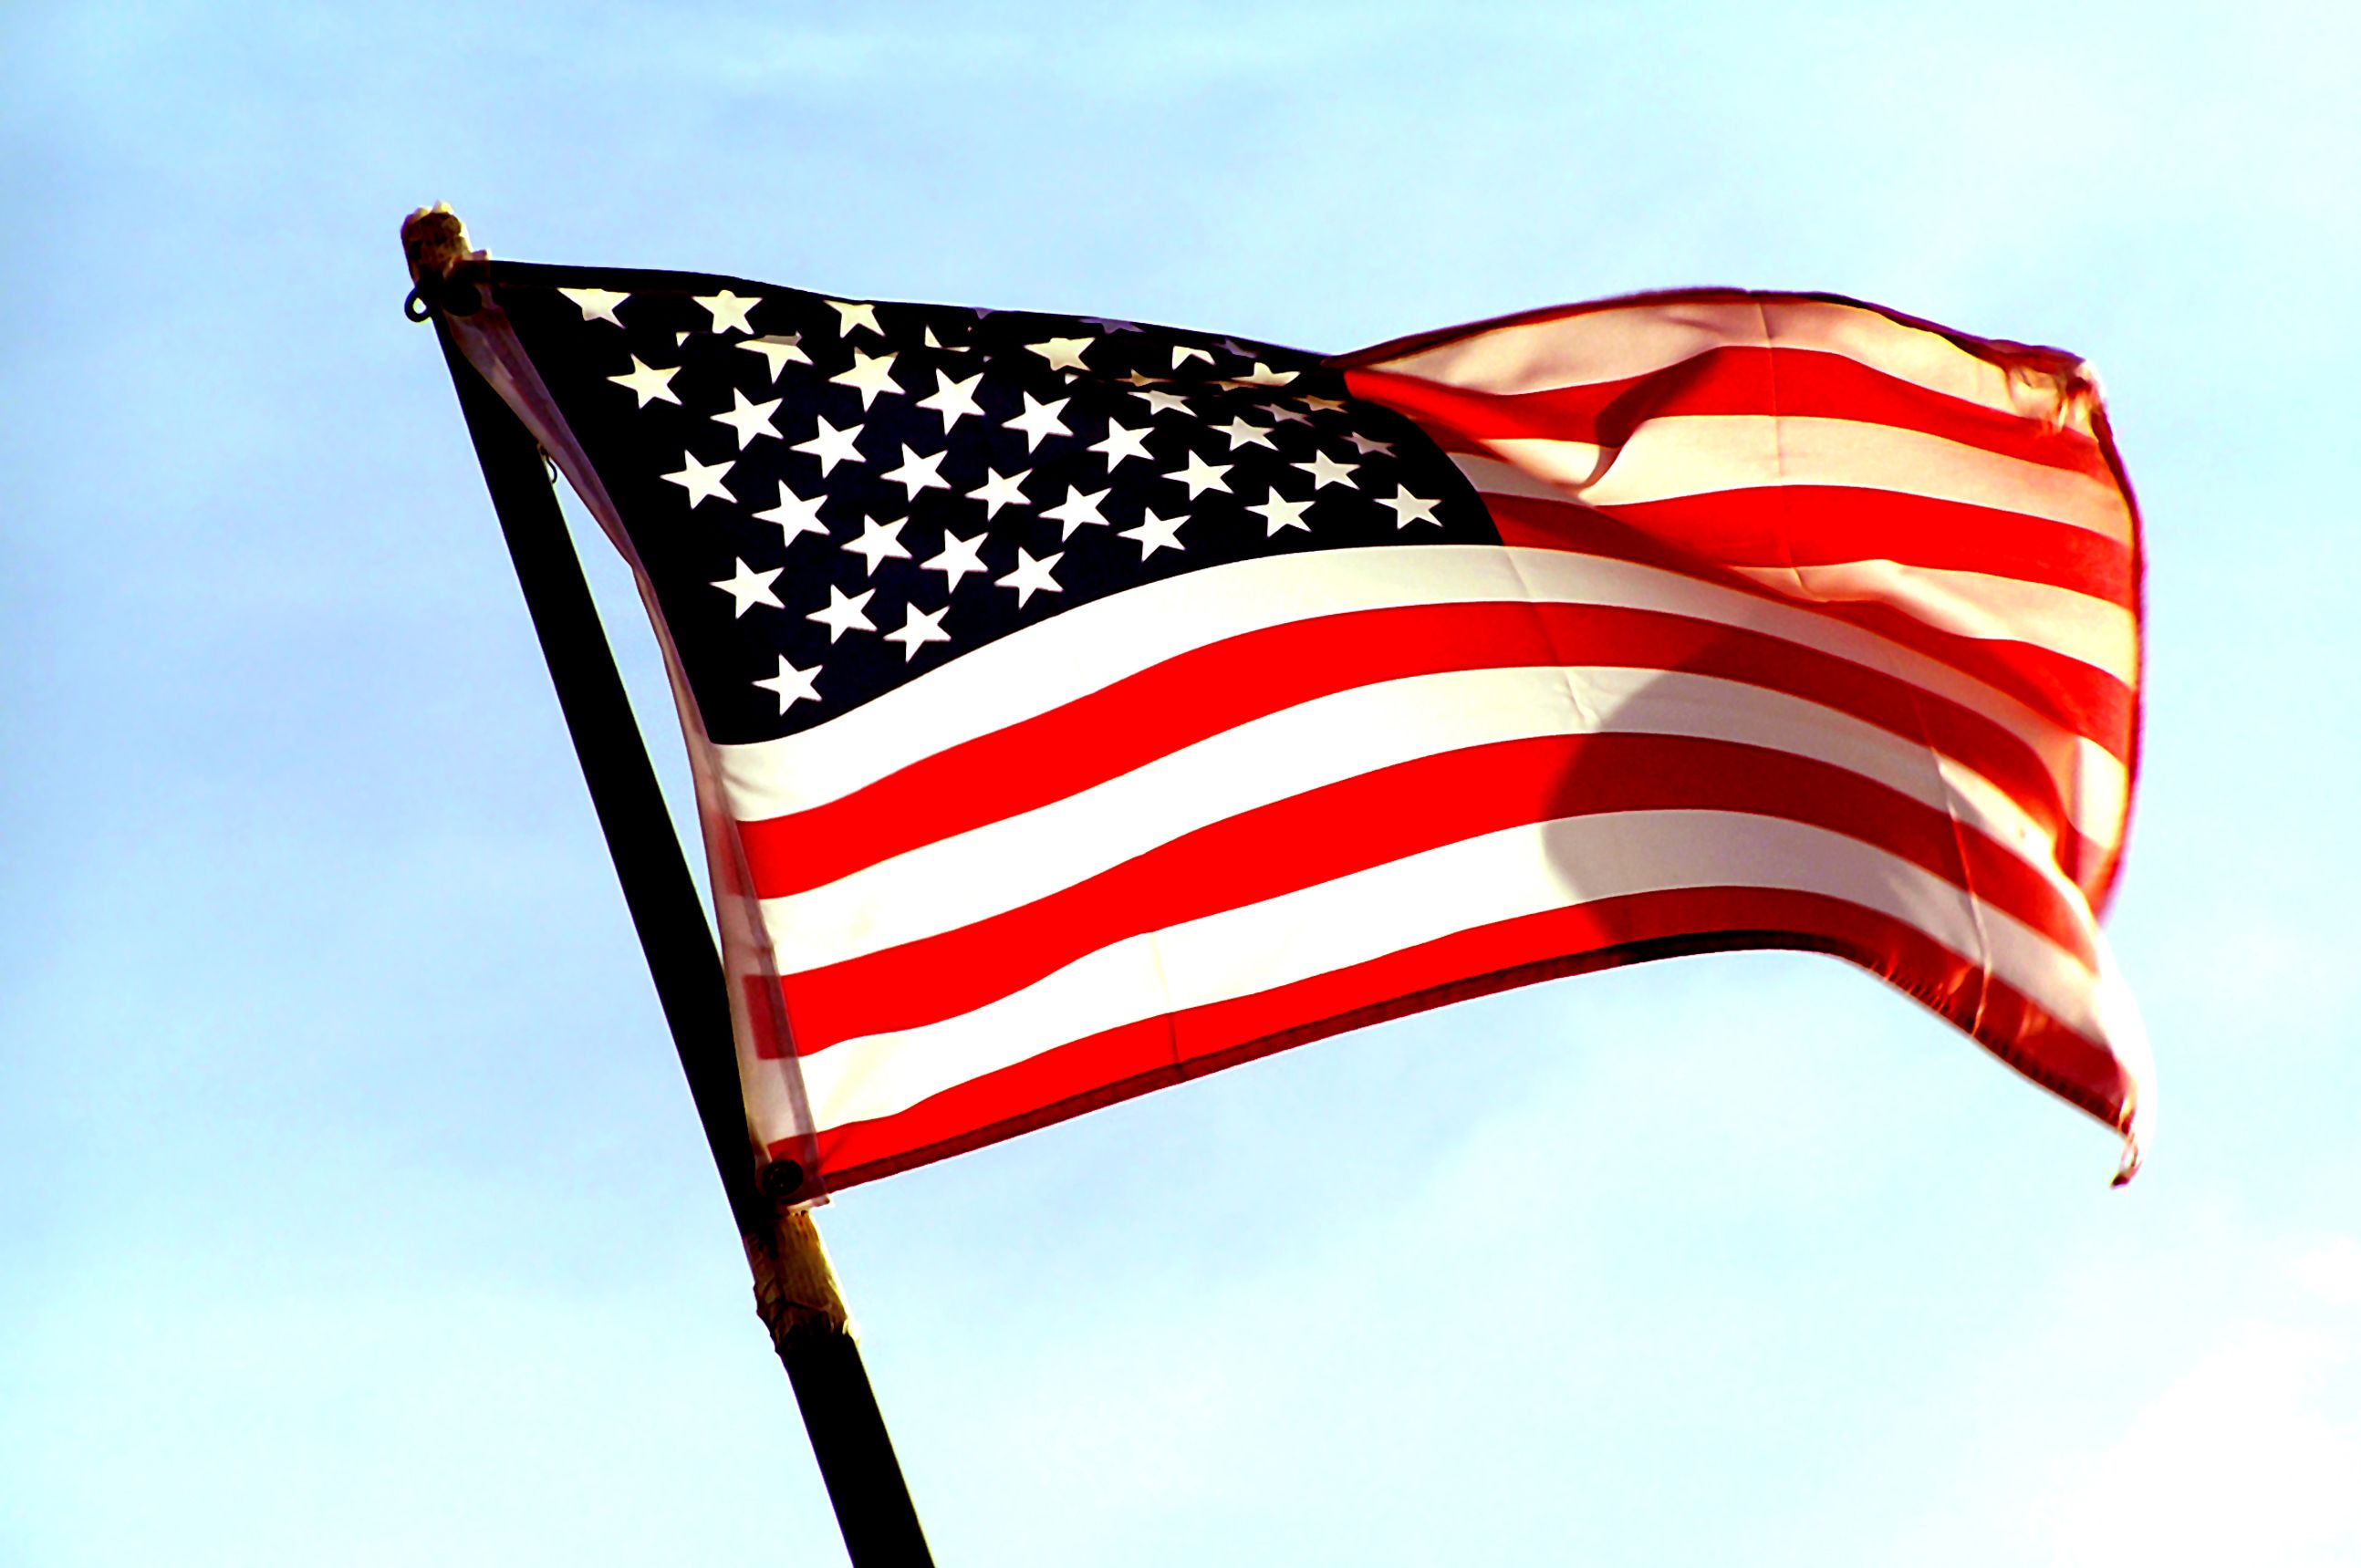 Free USA Flag Backgrounds For PowerPoint   Flags PPT Templates